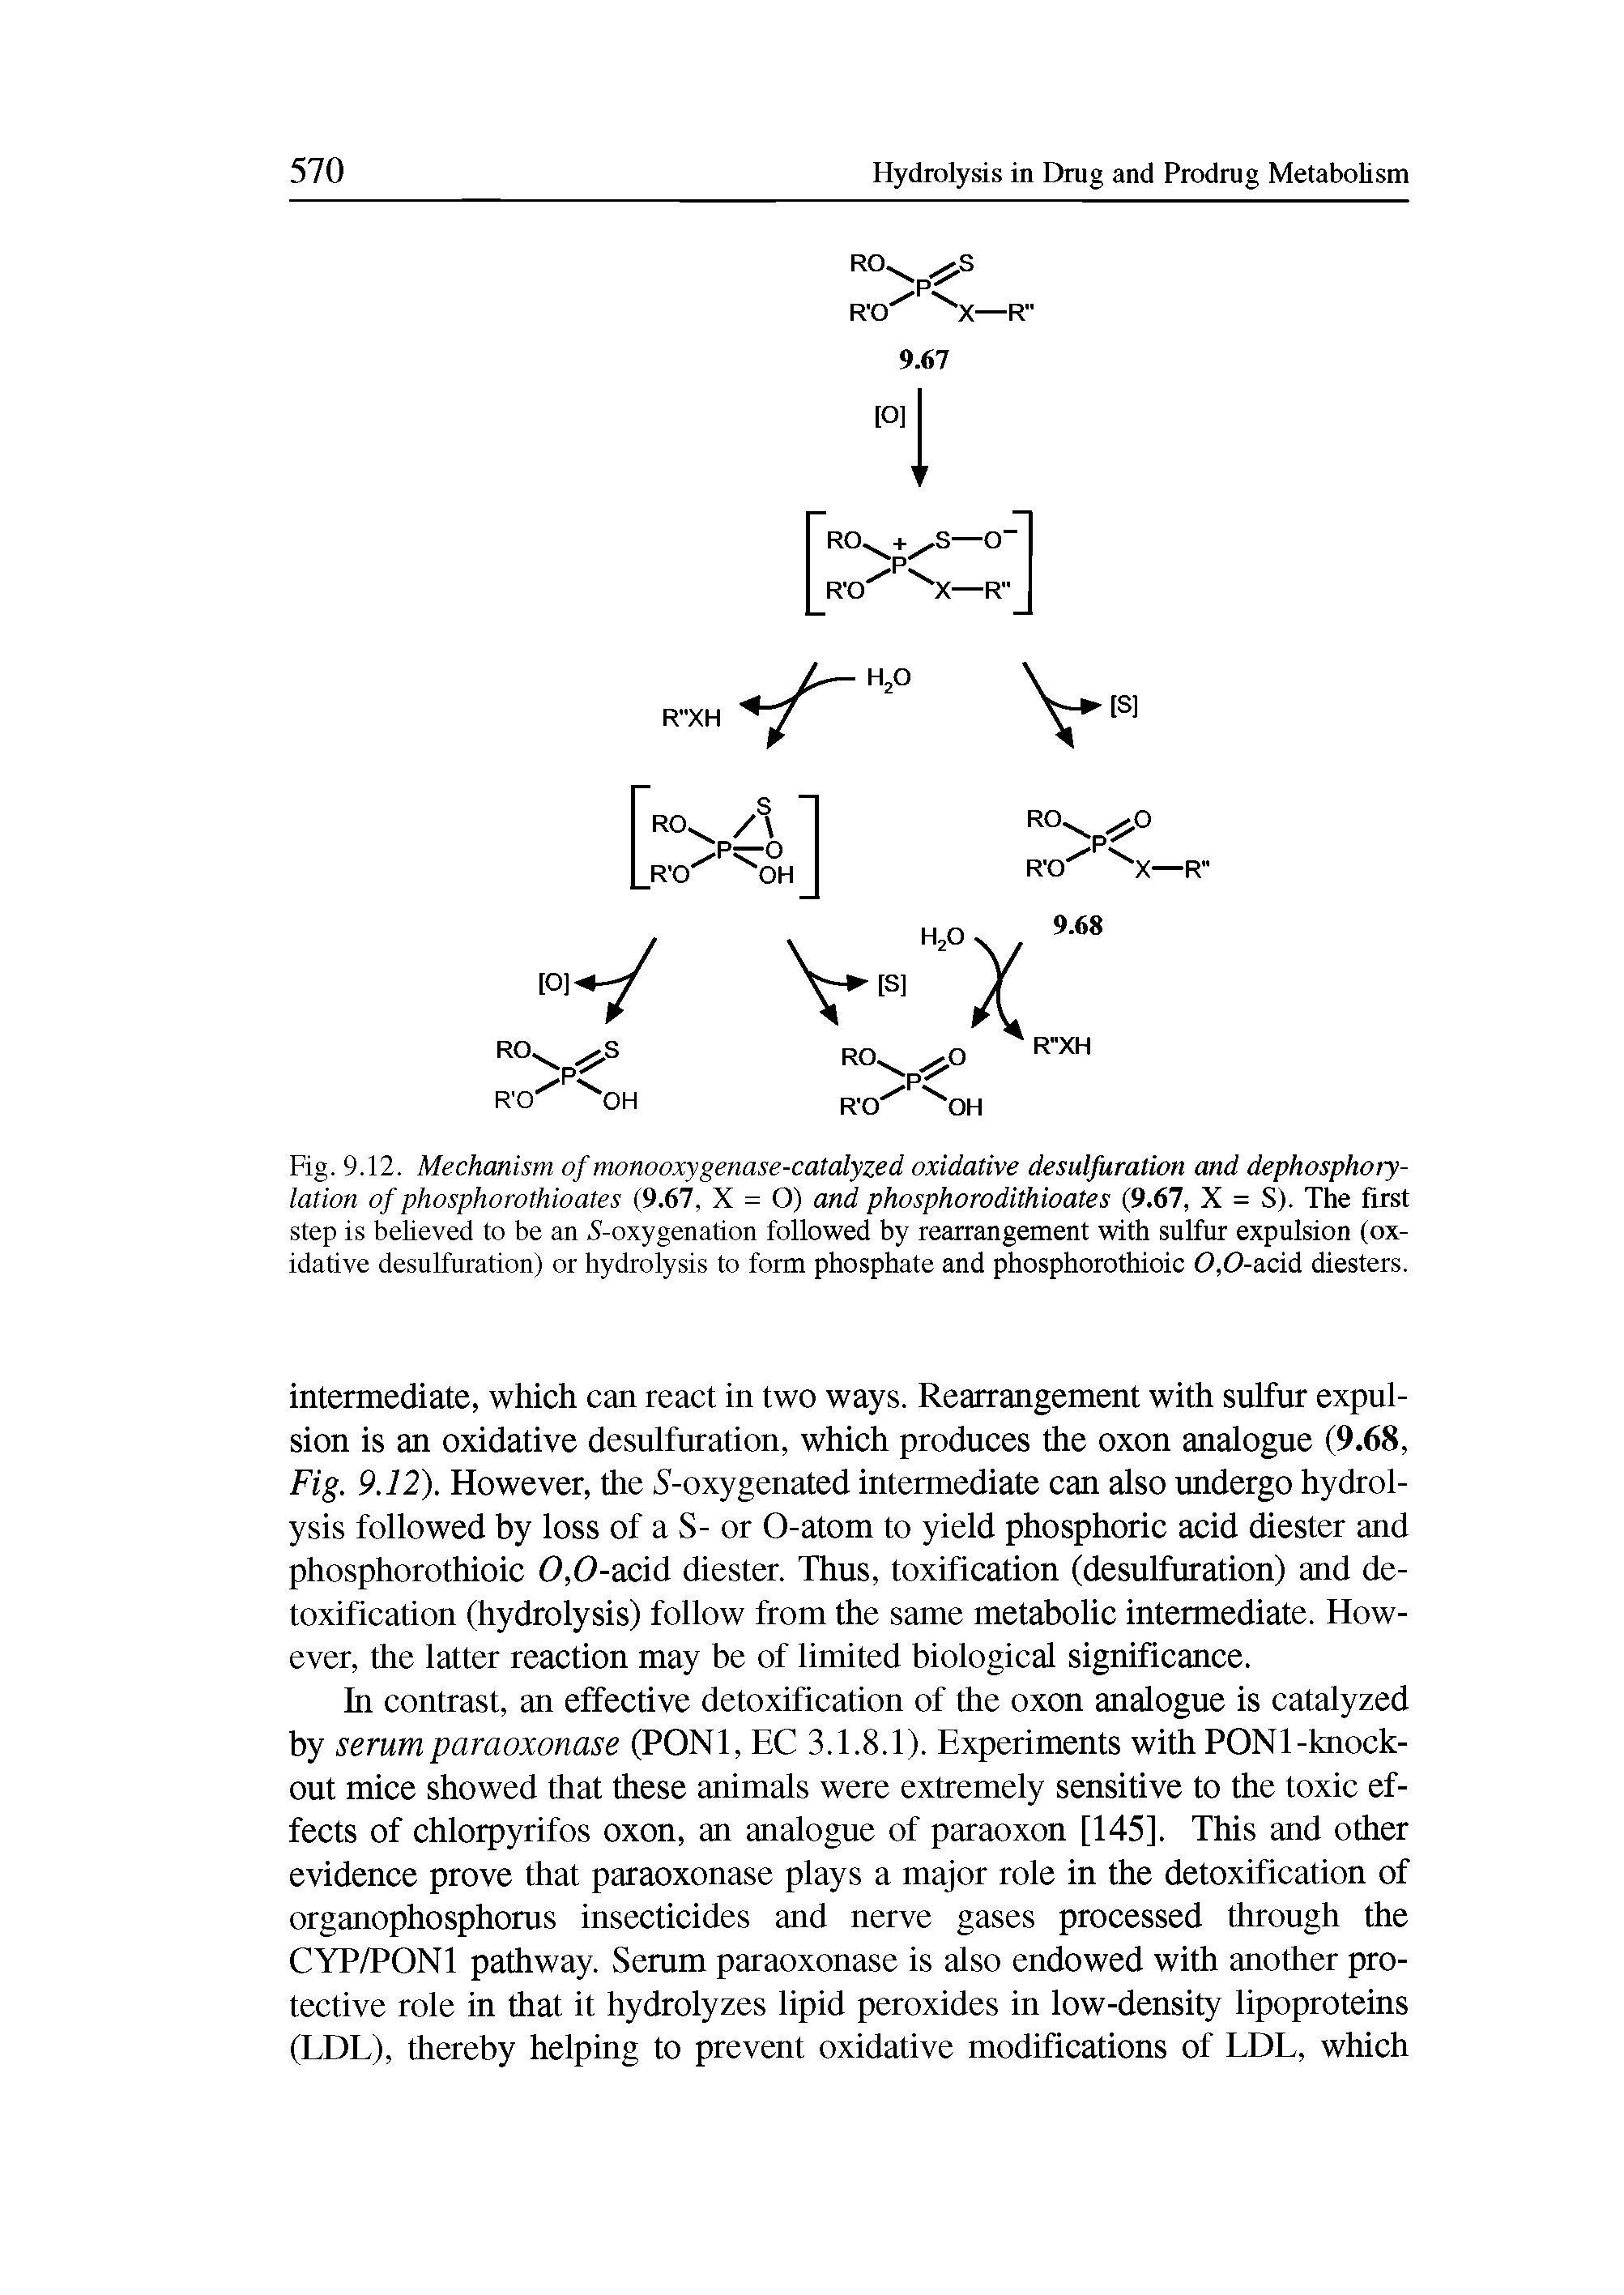 Fig. 9.12. Mechanism of monooxygenase-catalyzed oxidative desulfuration and dephosphorylation of phosphorothioates (9.67, X = O) and phosphorodithioates (9.67, X = S). The first step is believed to be an 5-oxygenation followed by rearrangement with sulfur expulsion (oxidative desulfuration) or hydrolysis to form phosphate and phosphorothioic 0,0-acid diesters.